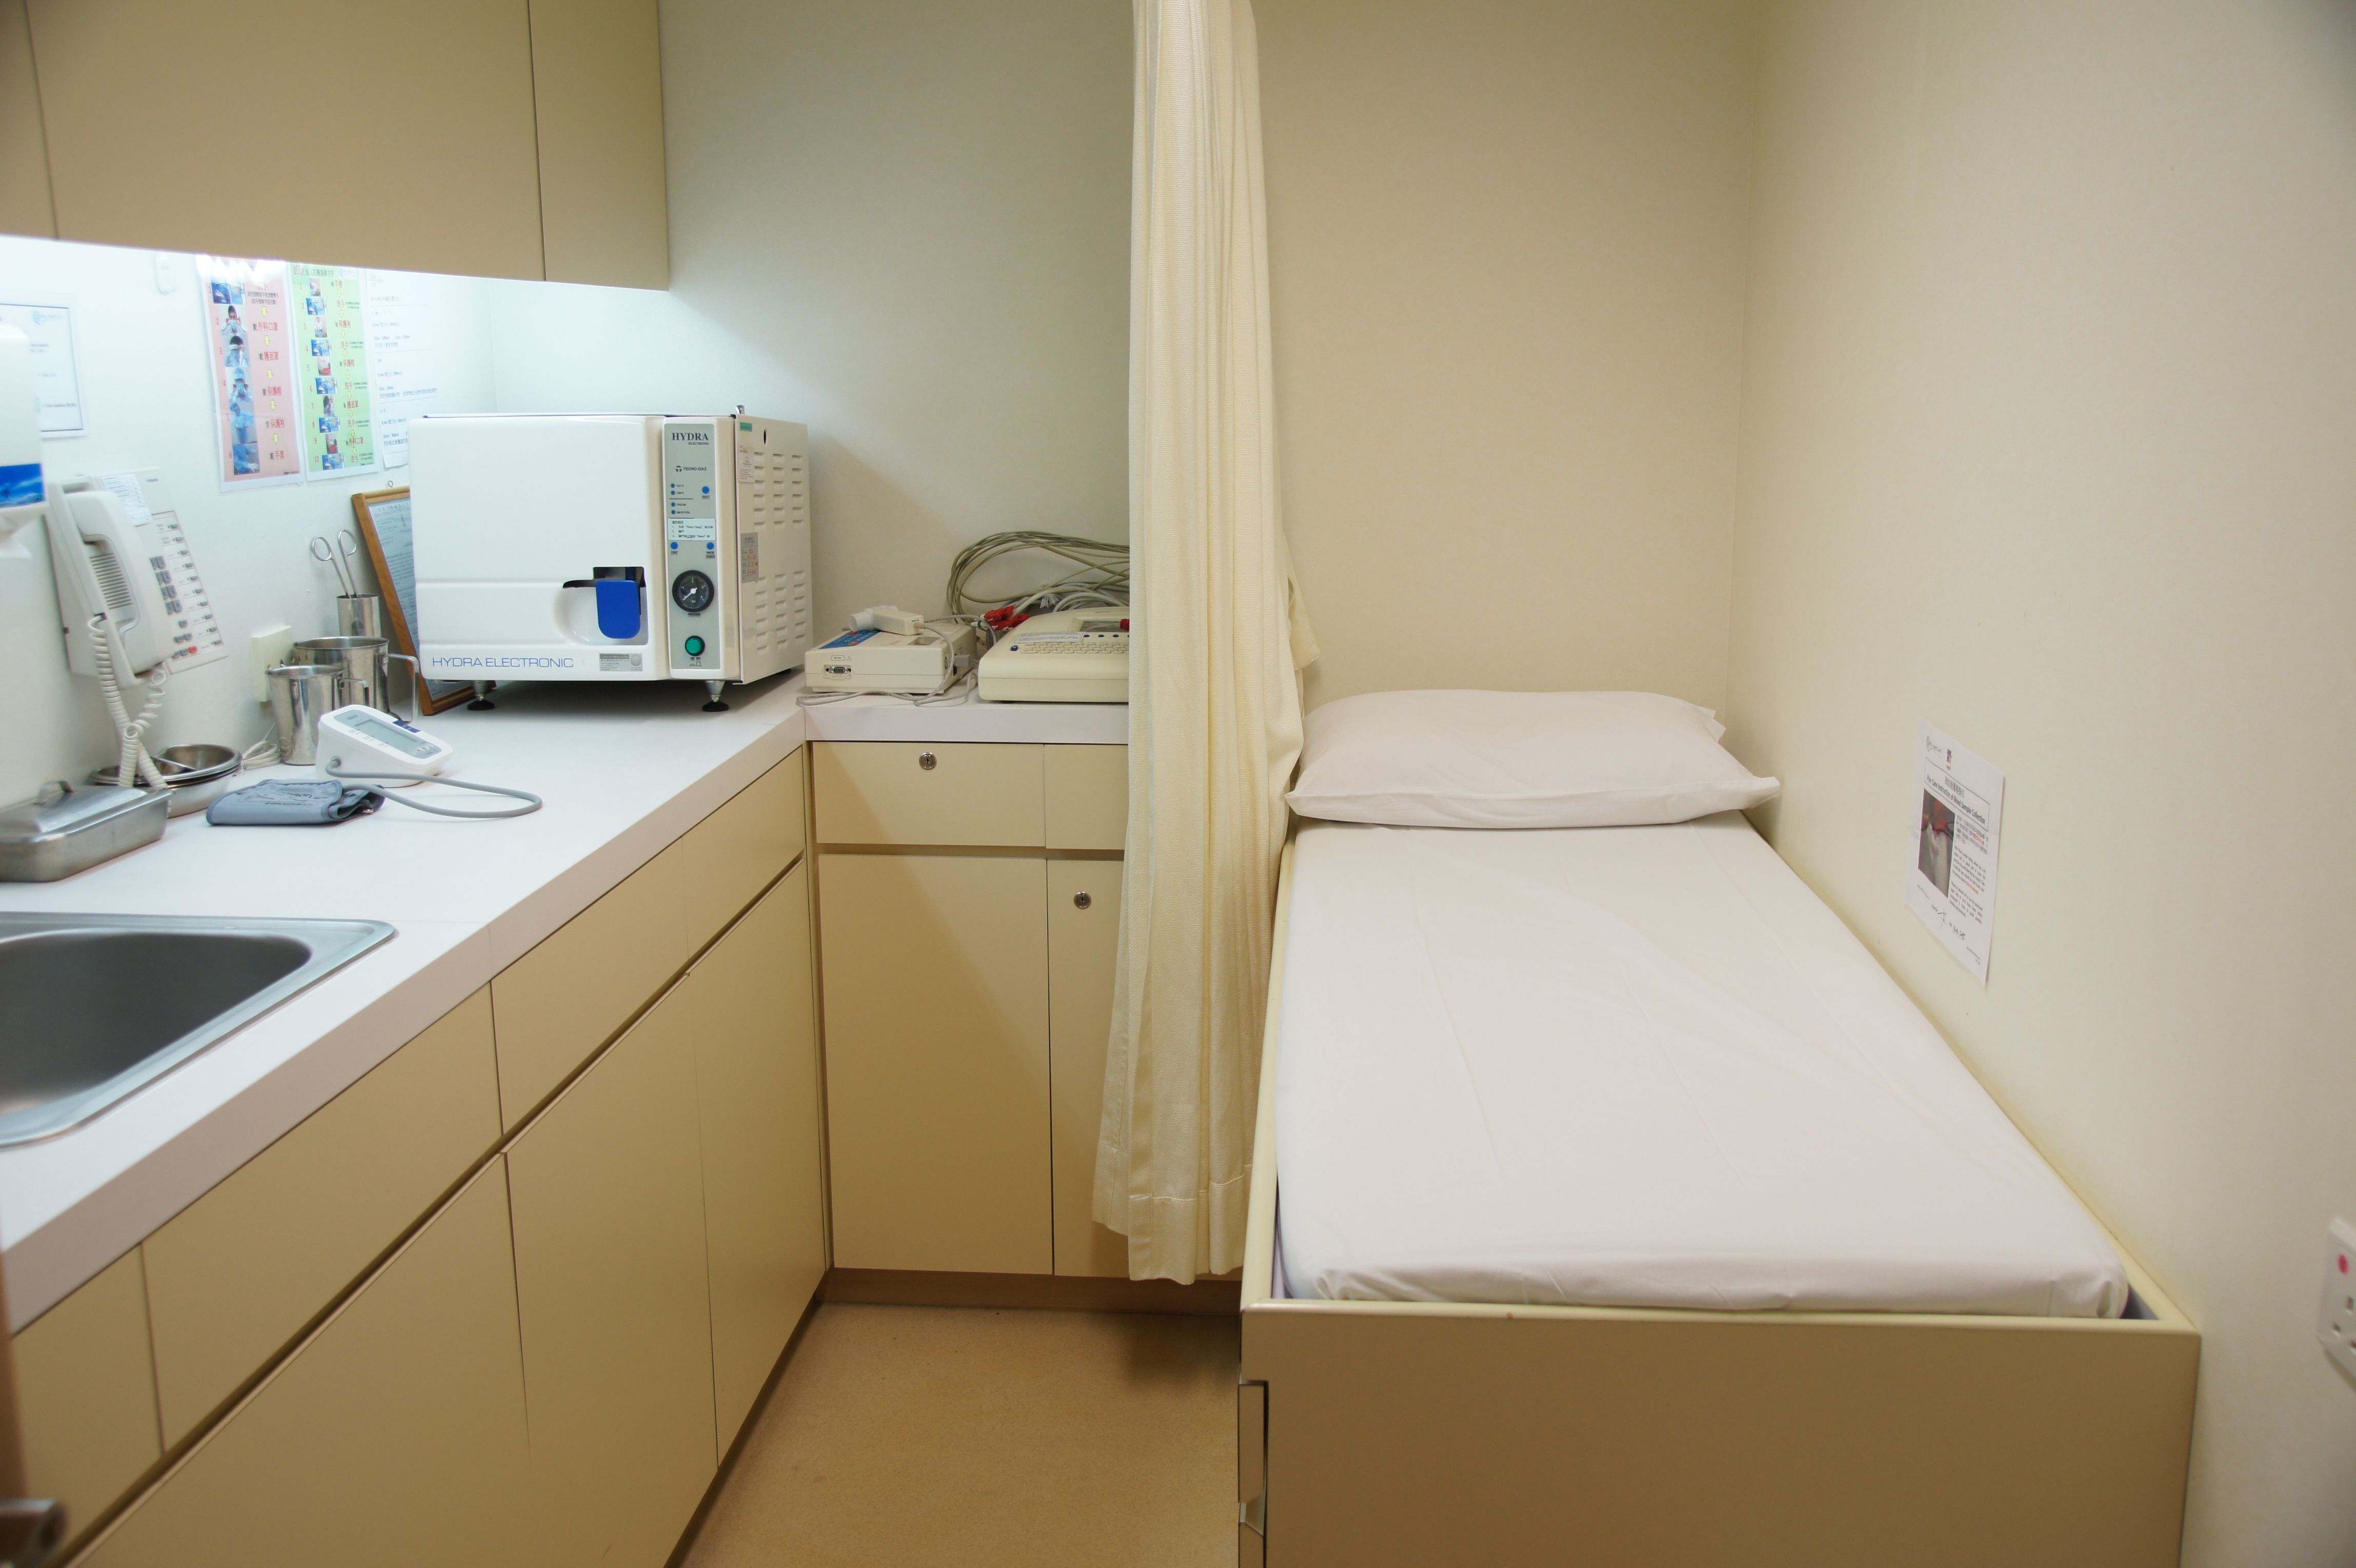 Examination room with patient bed and sink